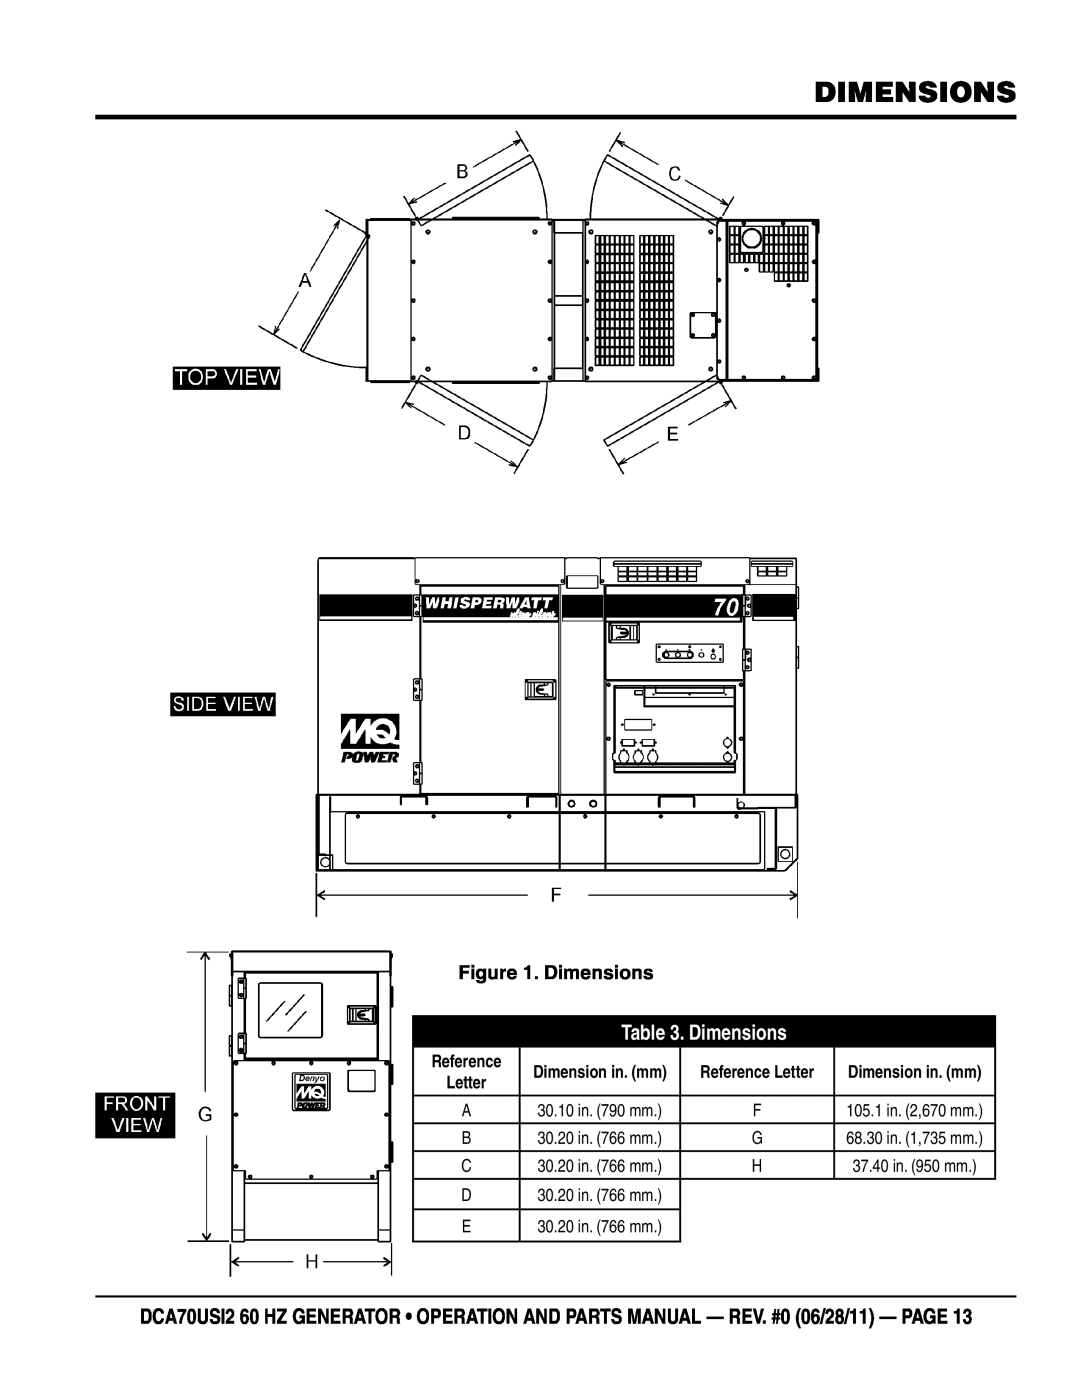 Multiquip DCA70USI2 manual Dimensions, Reference Letter, Dimension in. mm 